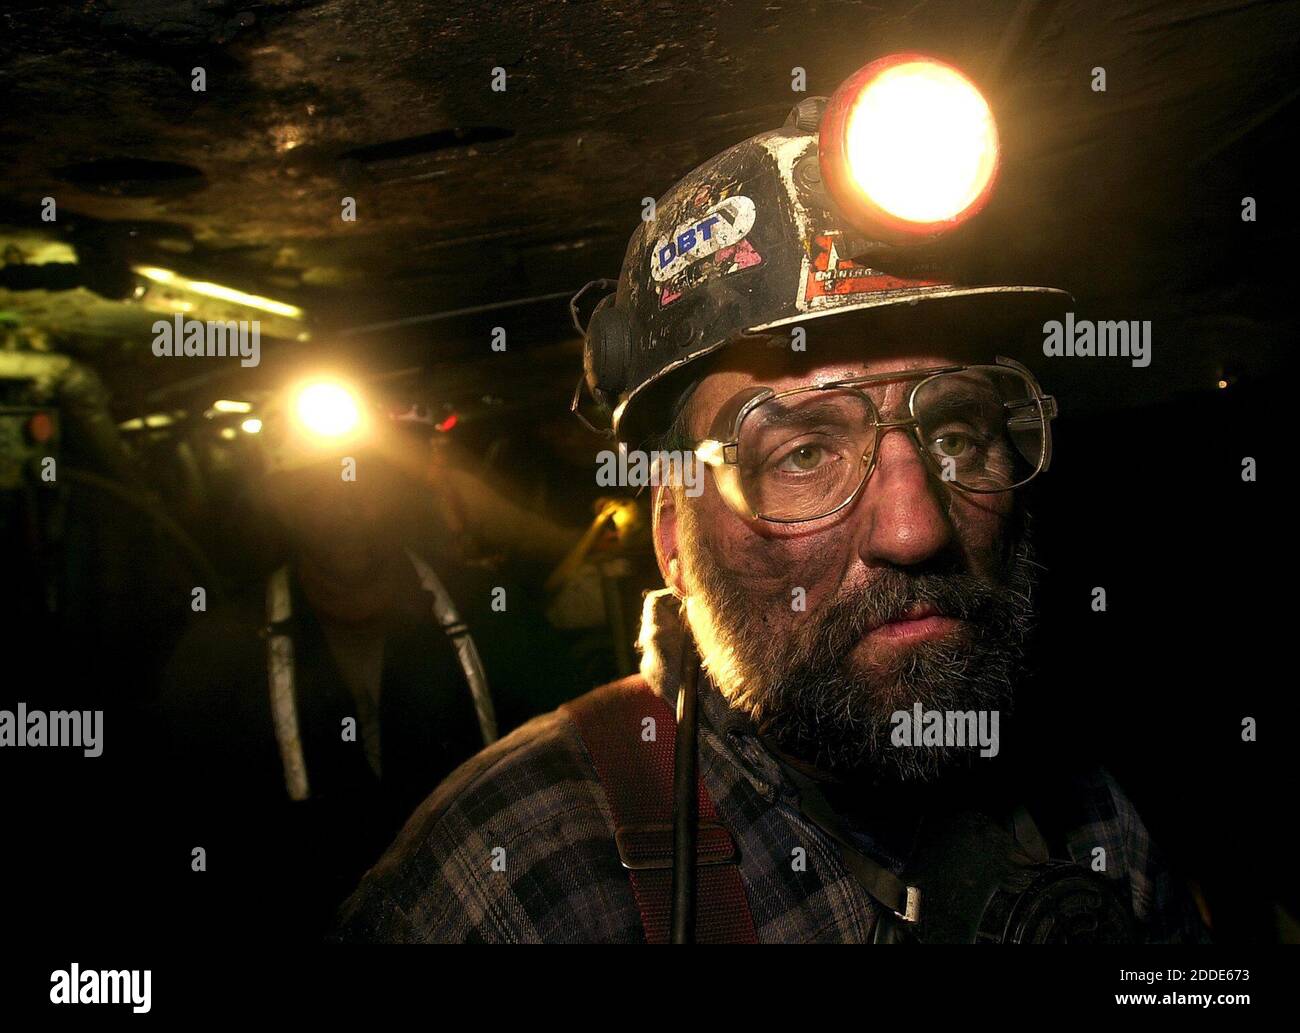 NO FILM, NO VIDEO, NO TV, NO DOCUMENTARY - File photo - Jim Lehman, 49, of Washington, Pennsylvania, works nine-hour days six days a week in the dark, damp and dangerous conditions of the mine. Lehman said that money is a big factor for being in this line of work. President-elect Donald Trump promised repeatedly throughout his campaign that he would revive the coal industry, billing himself as the “last shot for the miners.” And in traditional mining areas—think parts of West Virginia, Kentucky and Pennsylvania—Trump defeated rival Hillary Clinton by large margins. But policymakers on both sid Stock Photo